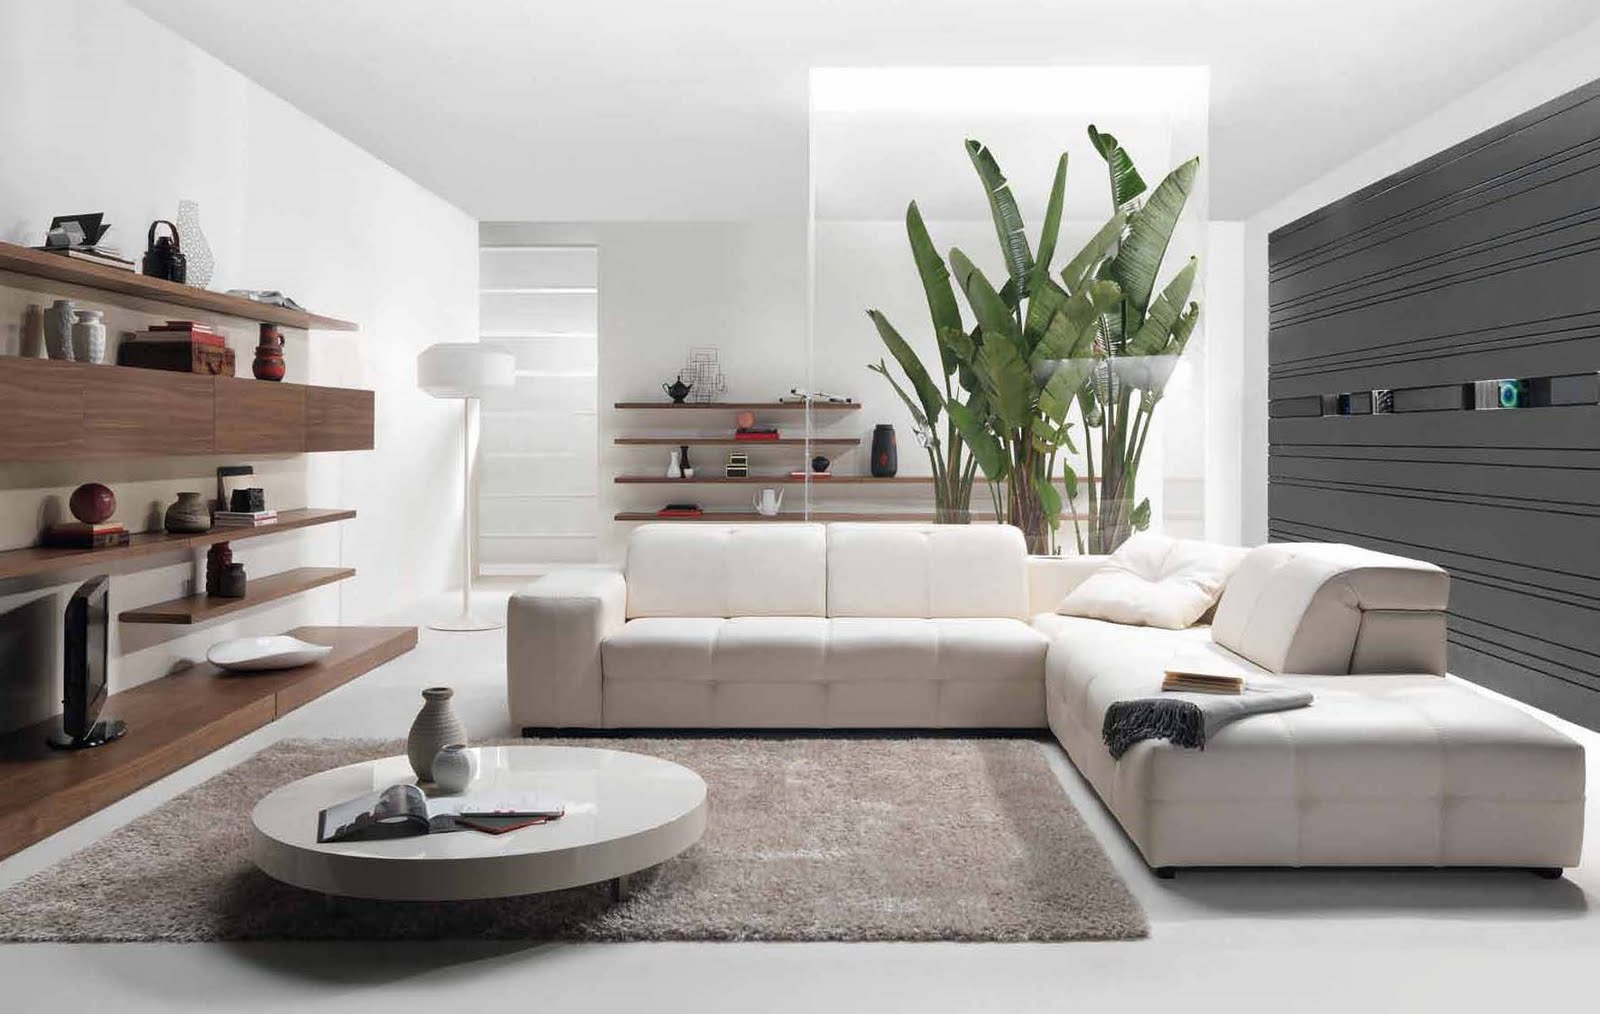 White Sectonal Living Enchanting White Sectional Sofa In Living Room Decorating Ideas Completed With Sleek Round Table On Soft Rug And Furnished With Wooden Wall Cabinets Living Room Tips For Living Room Decorating Ideas